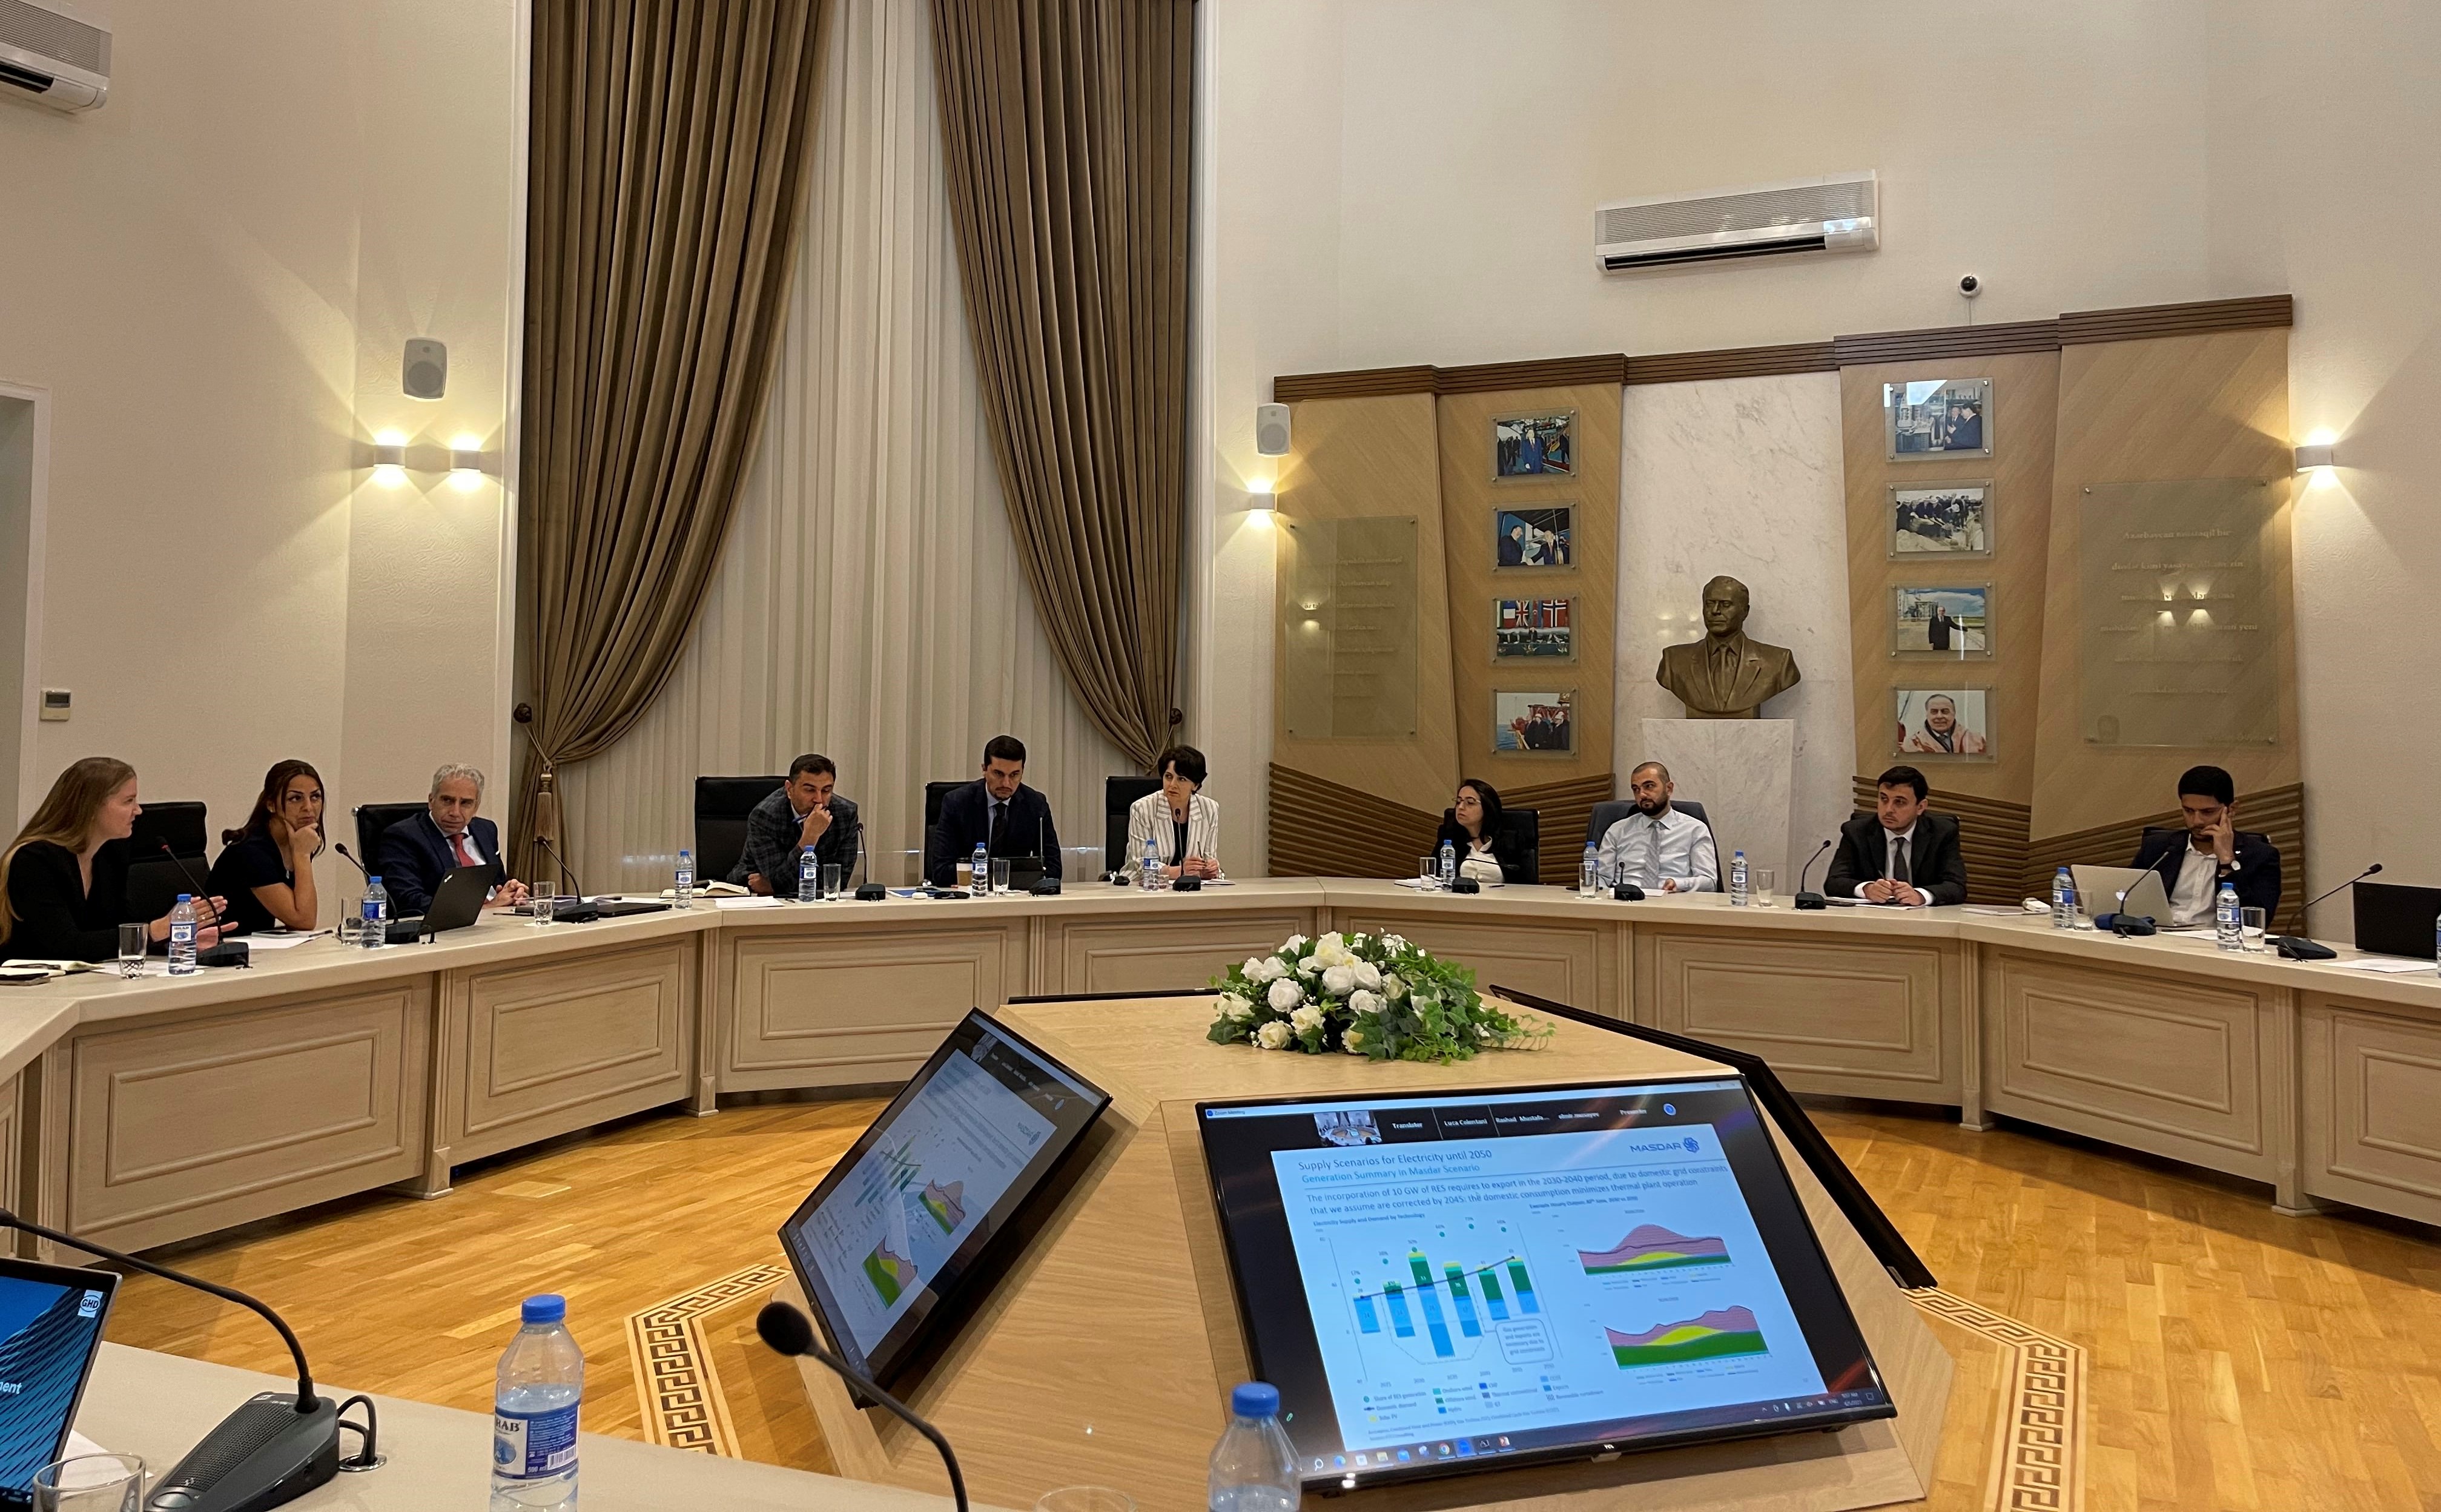 Studies on the development of green energy projects were discussed